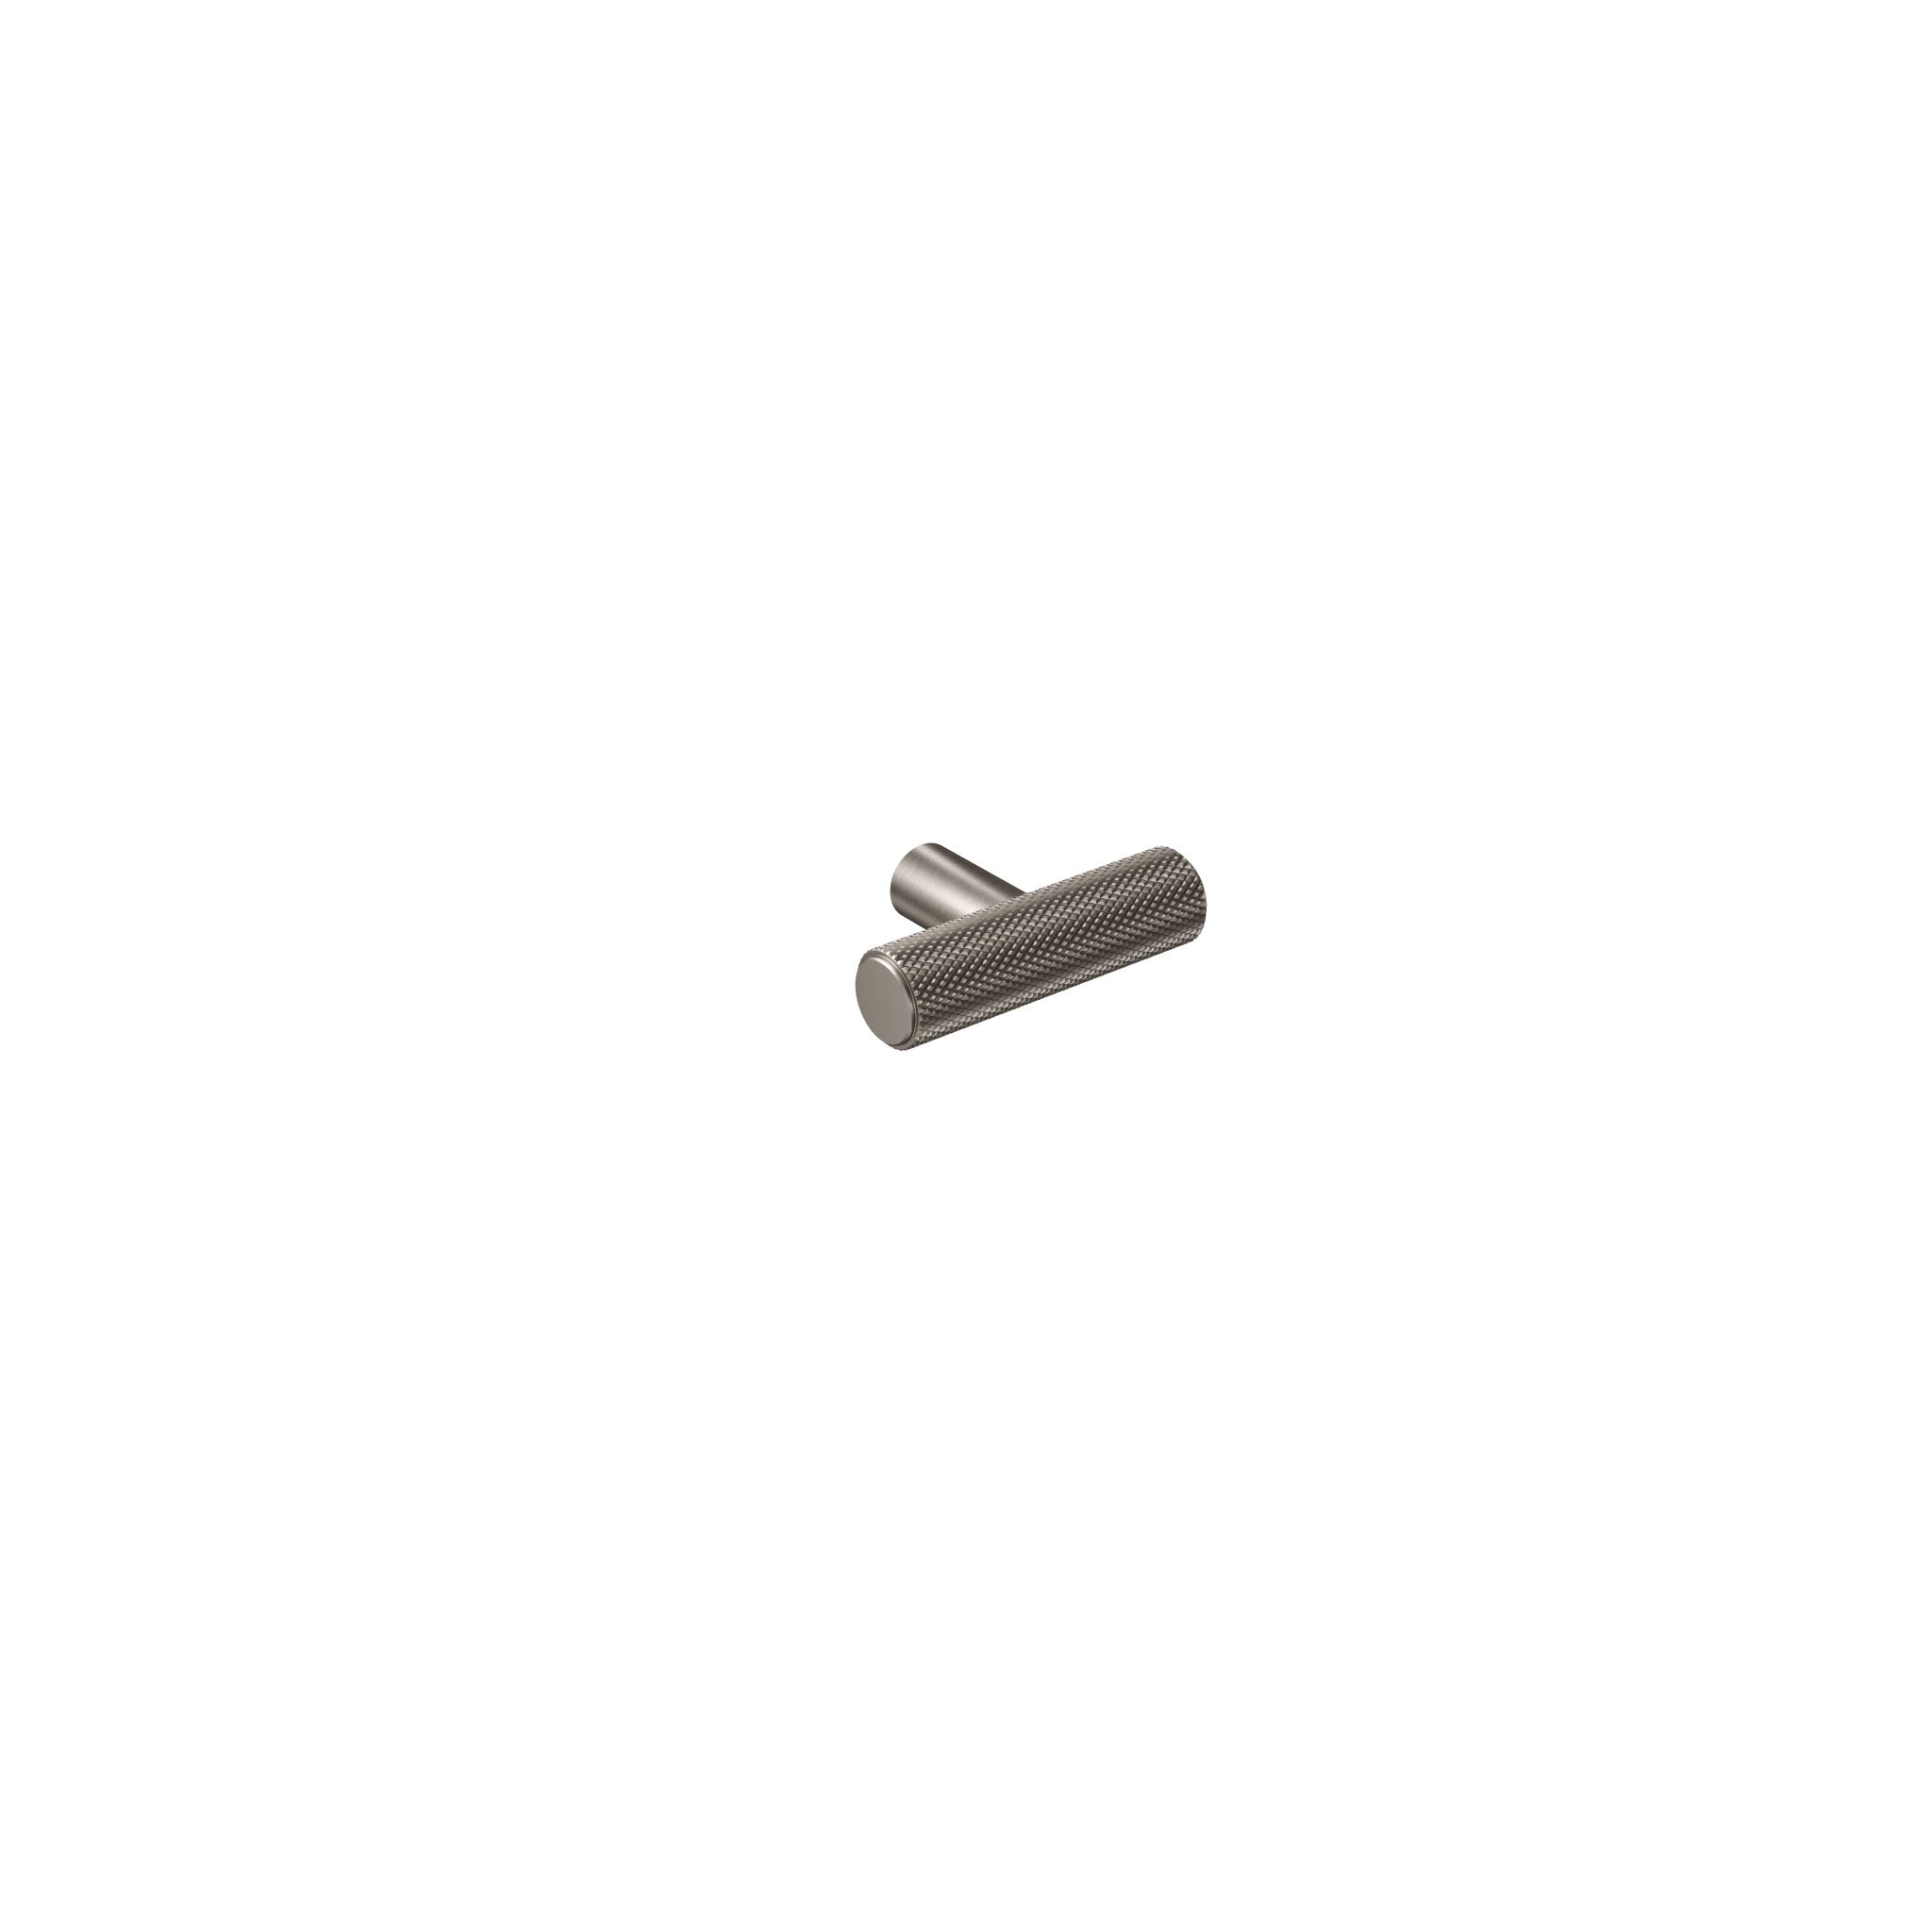 Knurl 15mm Pull Handle-Industrial Nickel-T-Bar 55mm-The Hairpin Leg Co.